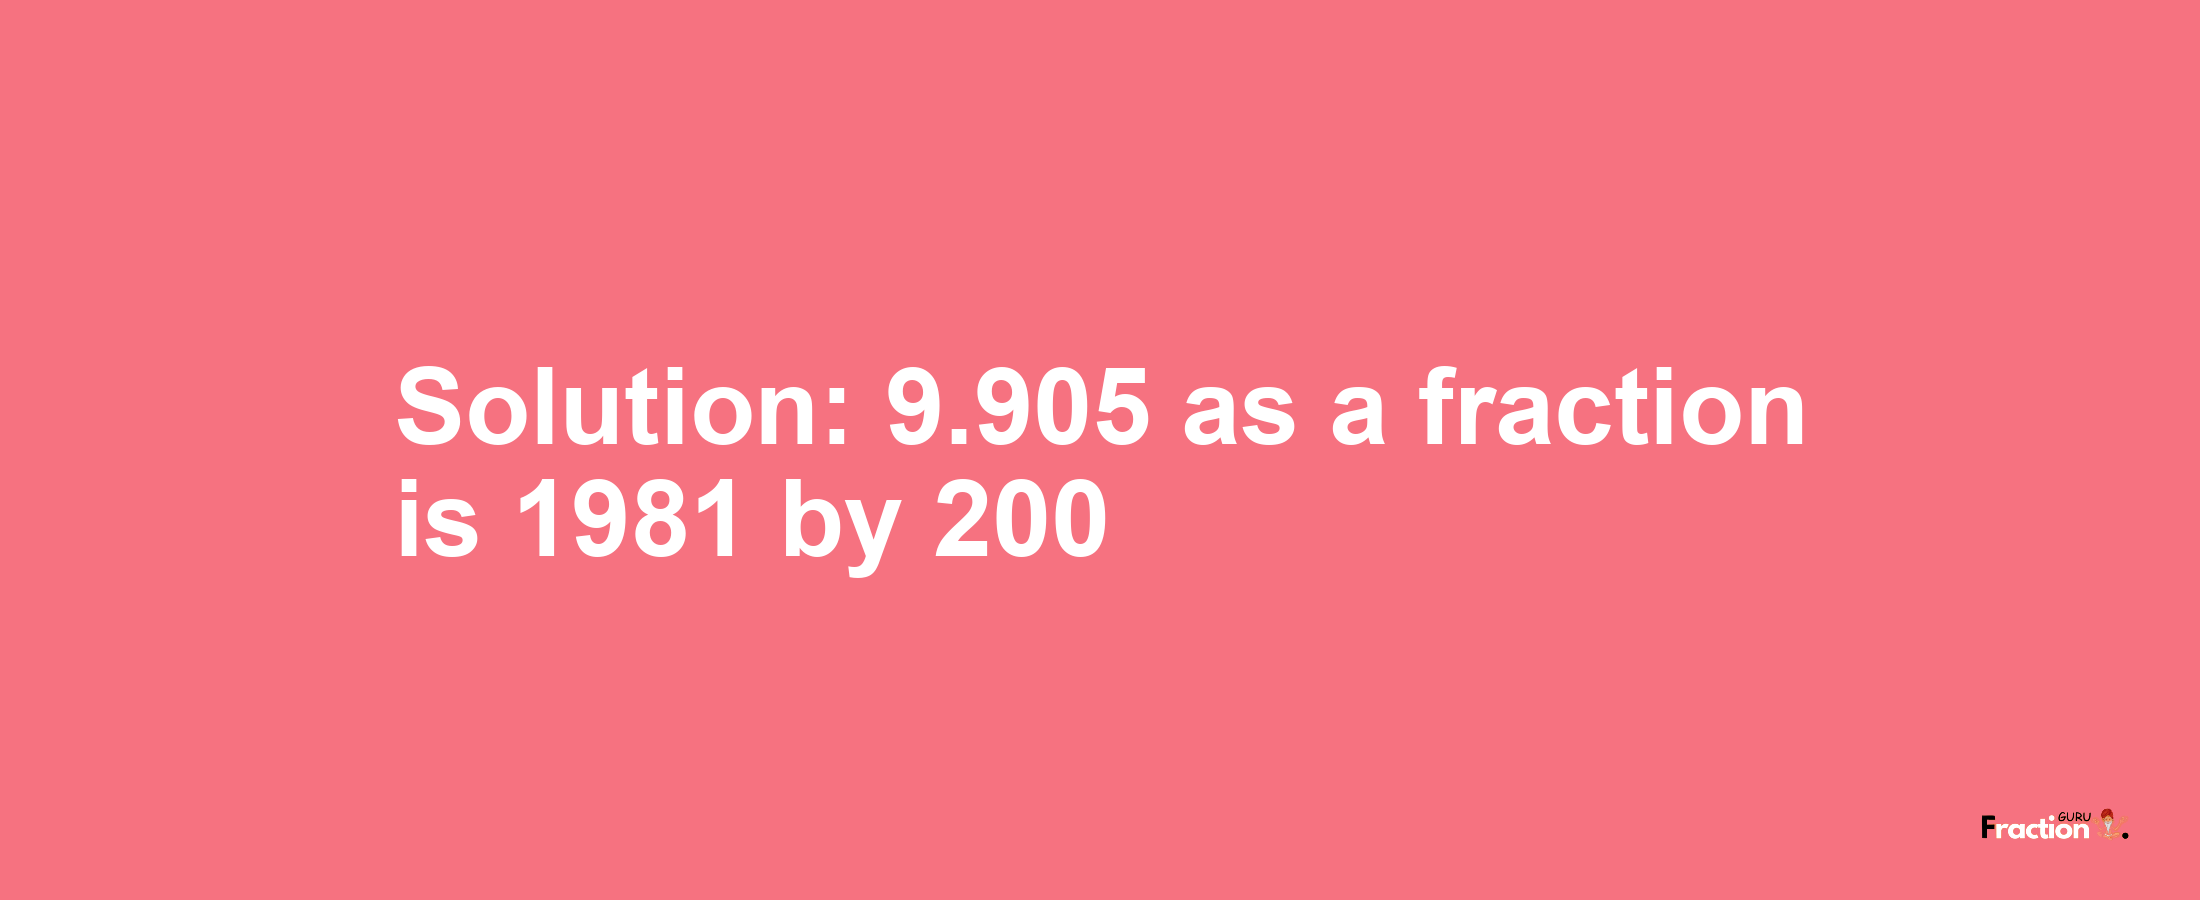 Solution:9.905 as a fraction is 1981/200